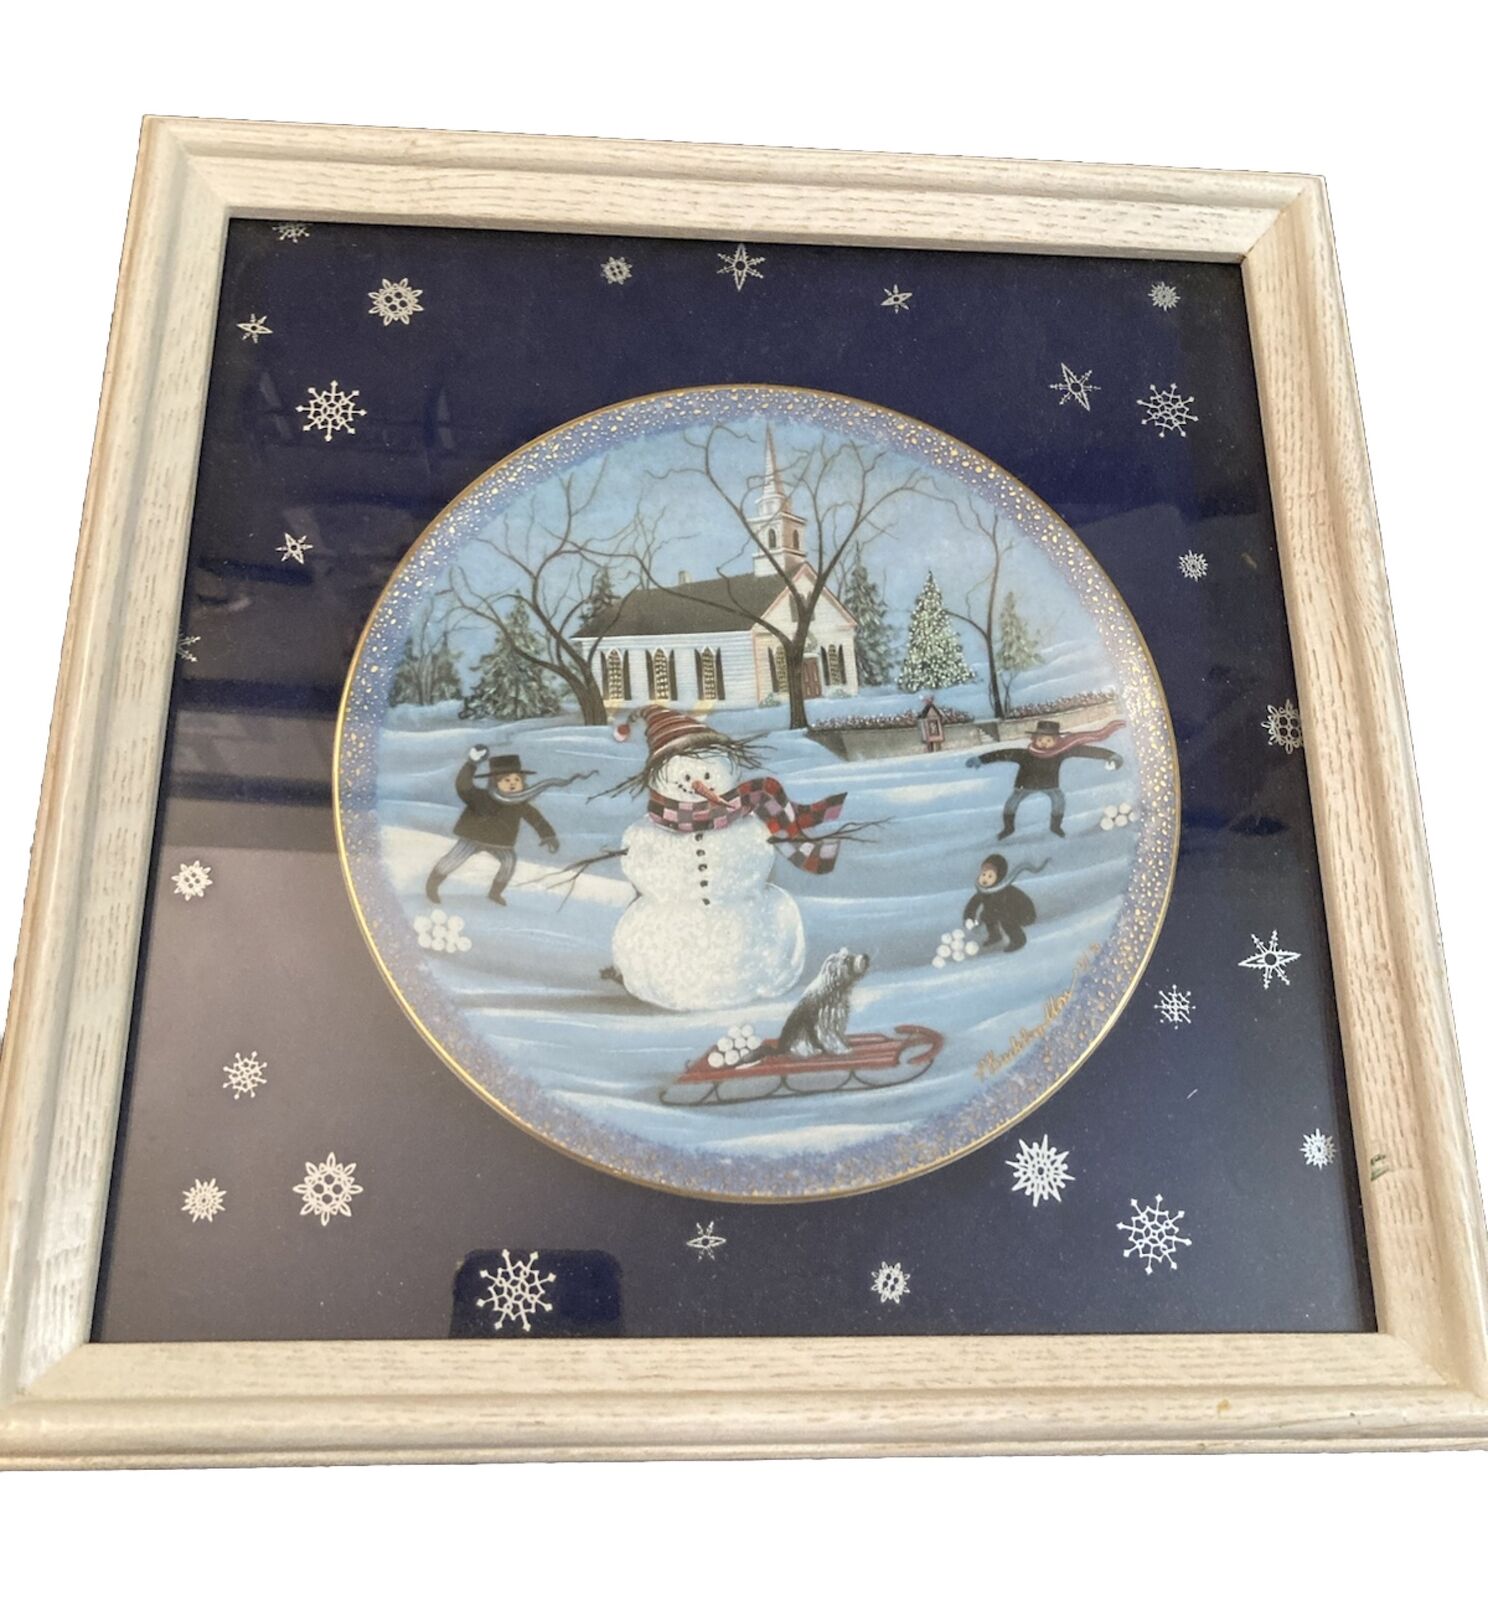 P Buckley Moss The Snowman Plate Framed 1991 Wood Frame Numbered West Germany